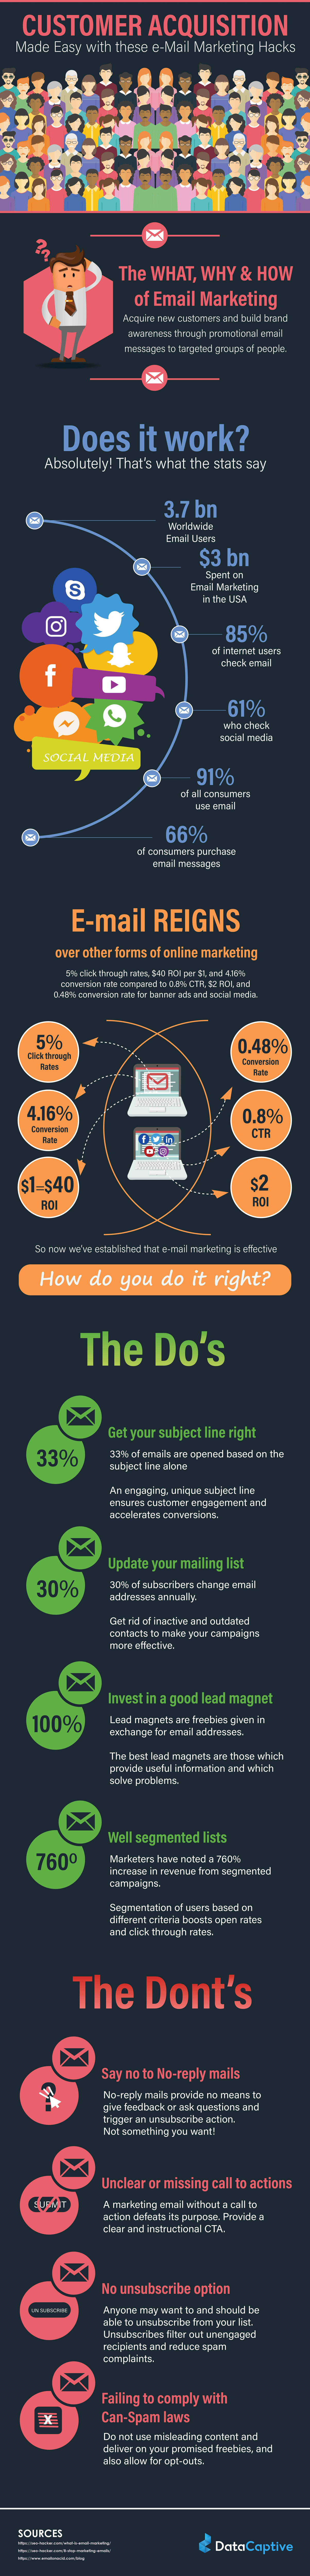 Customer-Acquisition-Made-Easy-With-These-Email-Marketing-Hacks-Infographic